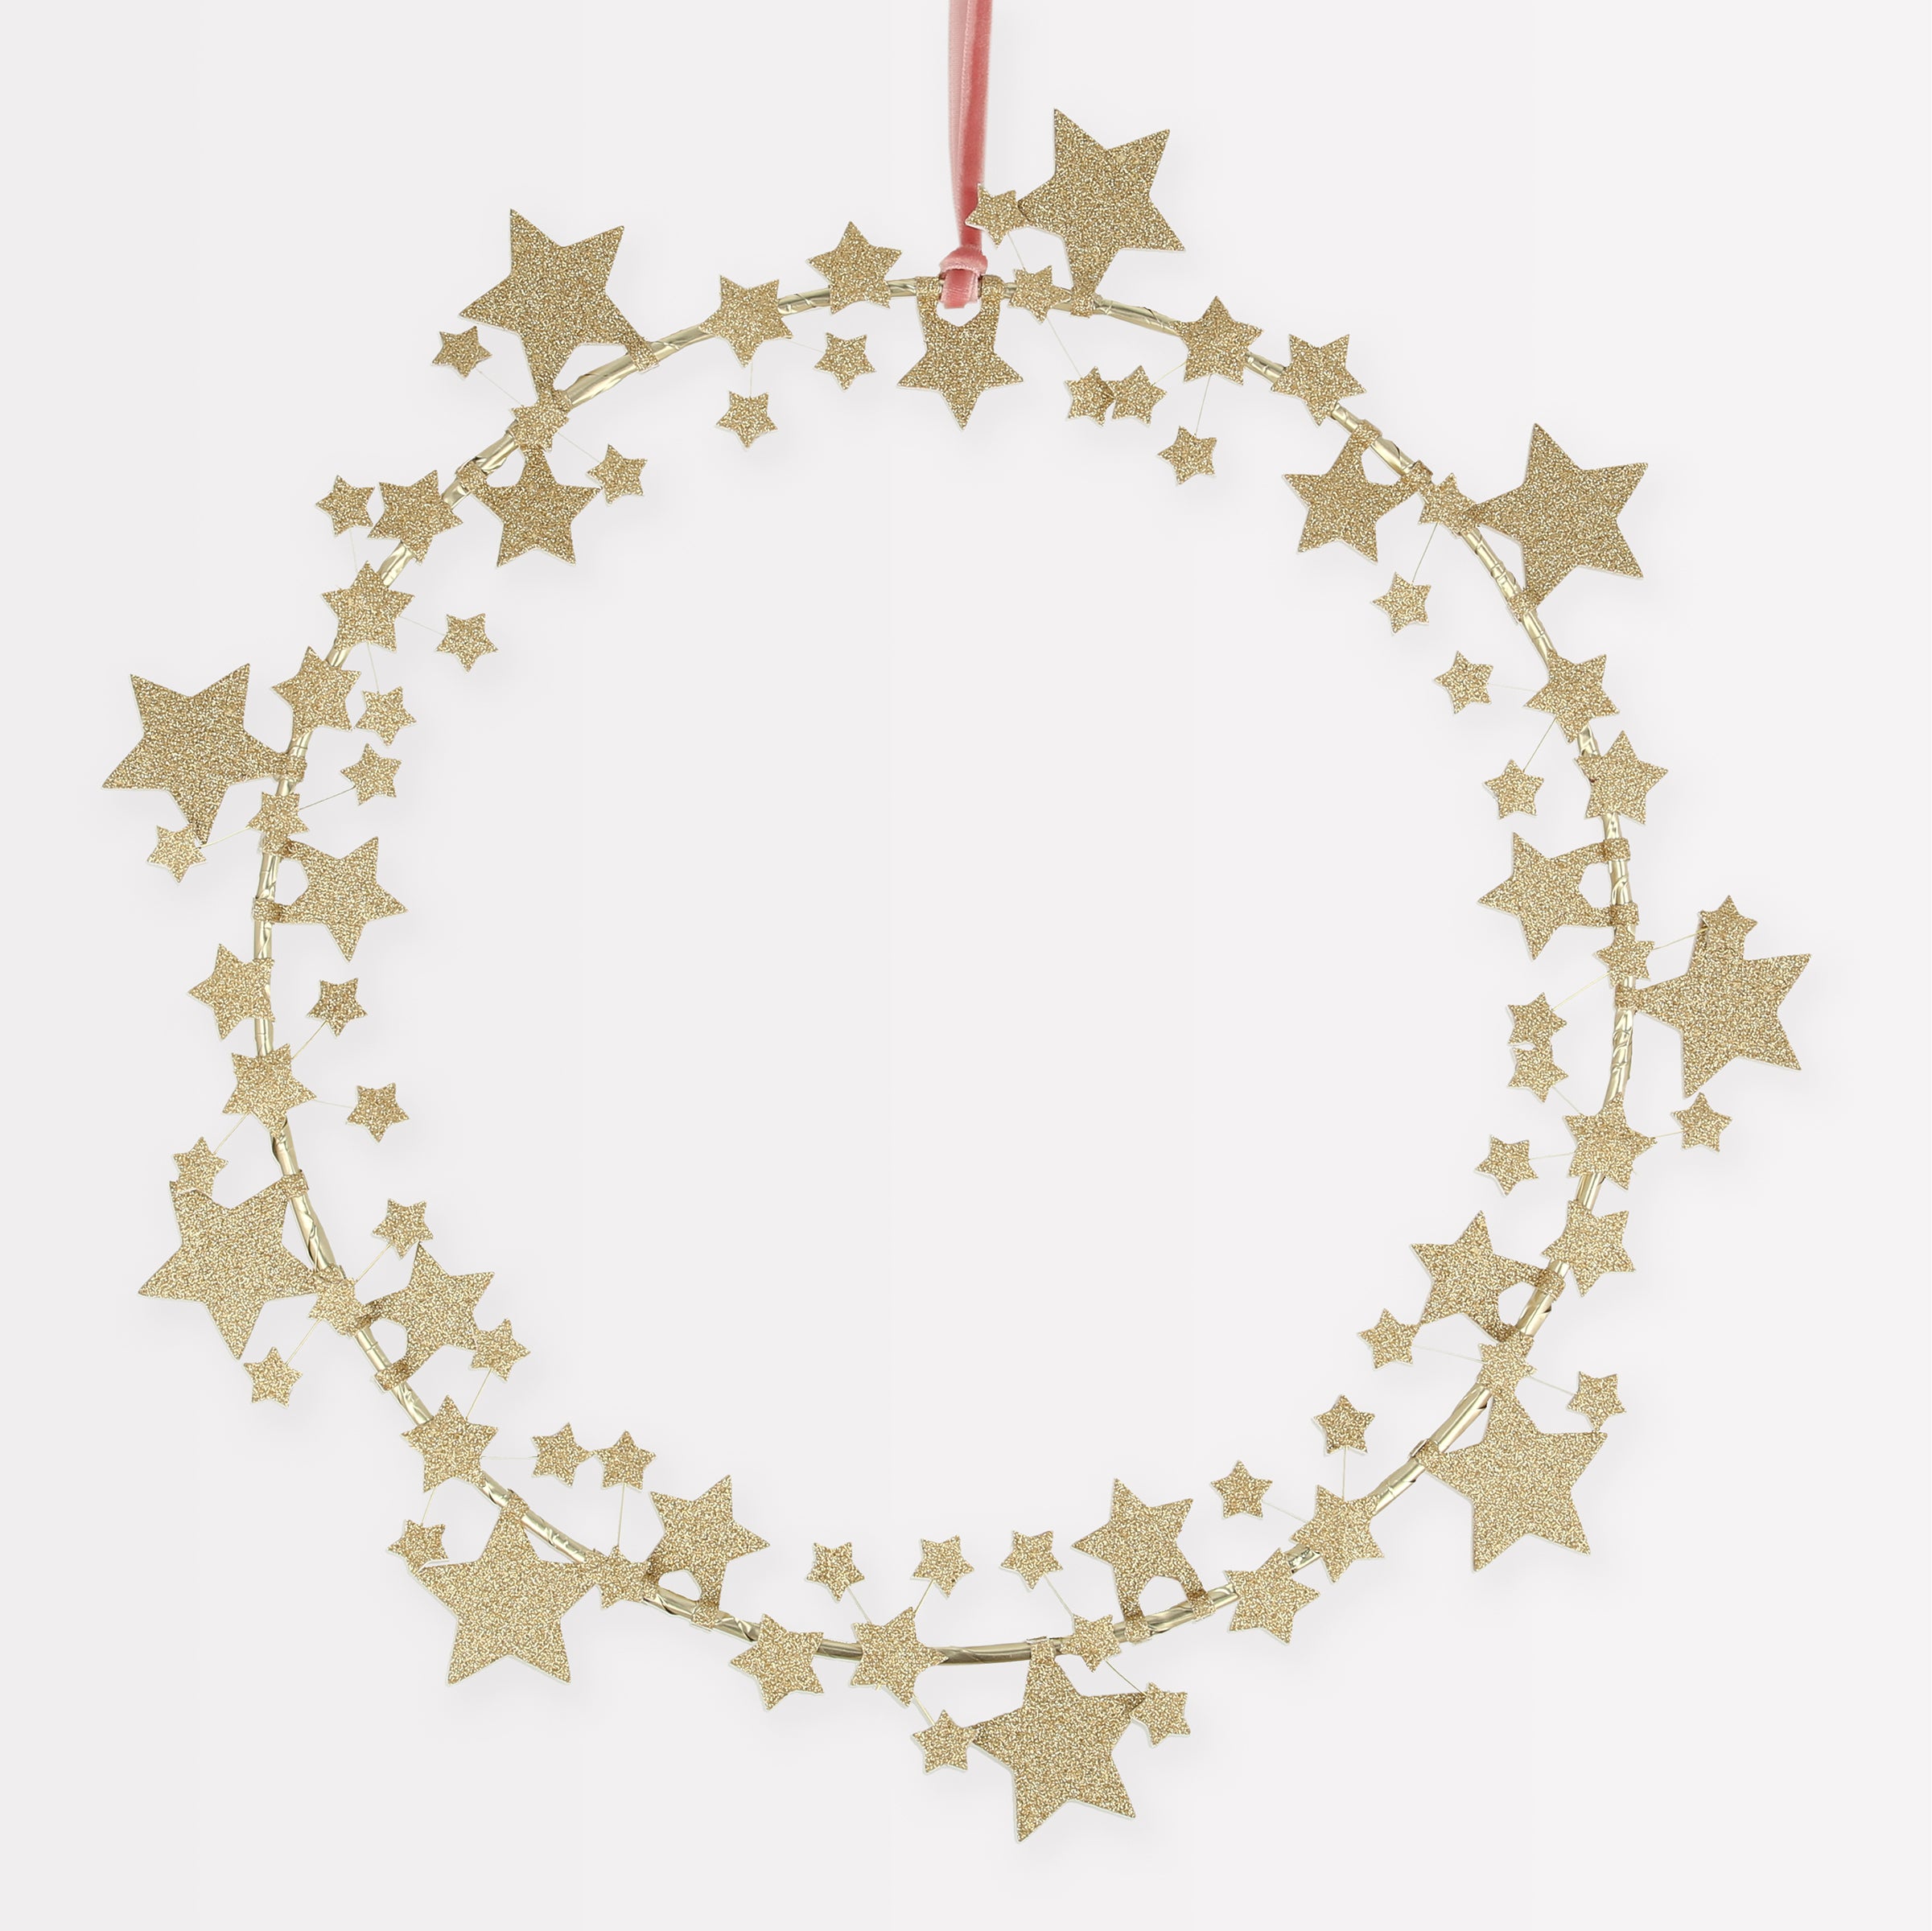 Our paper wreath is the perfect Christmas star decoration.